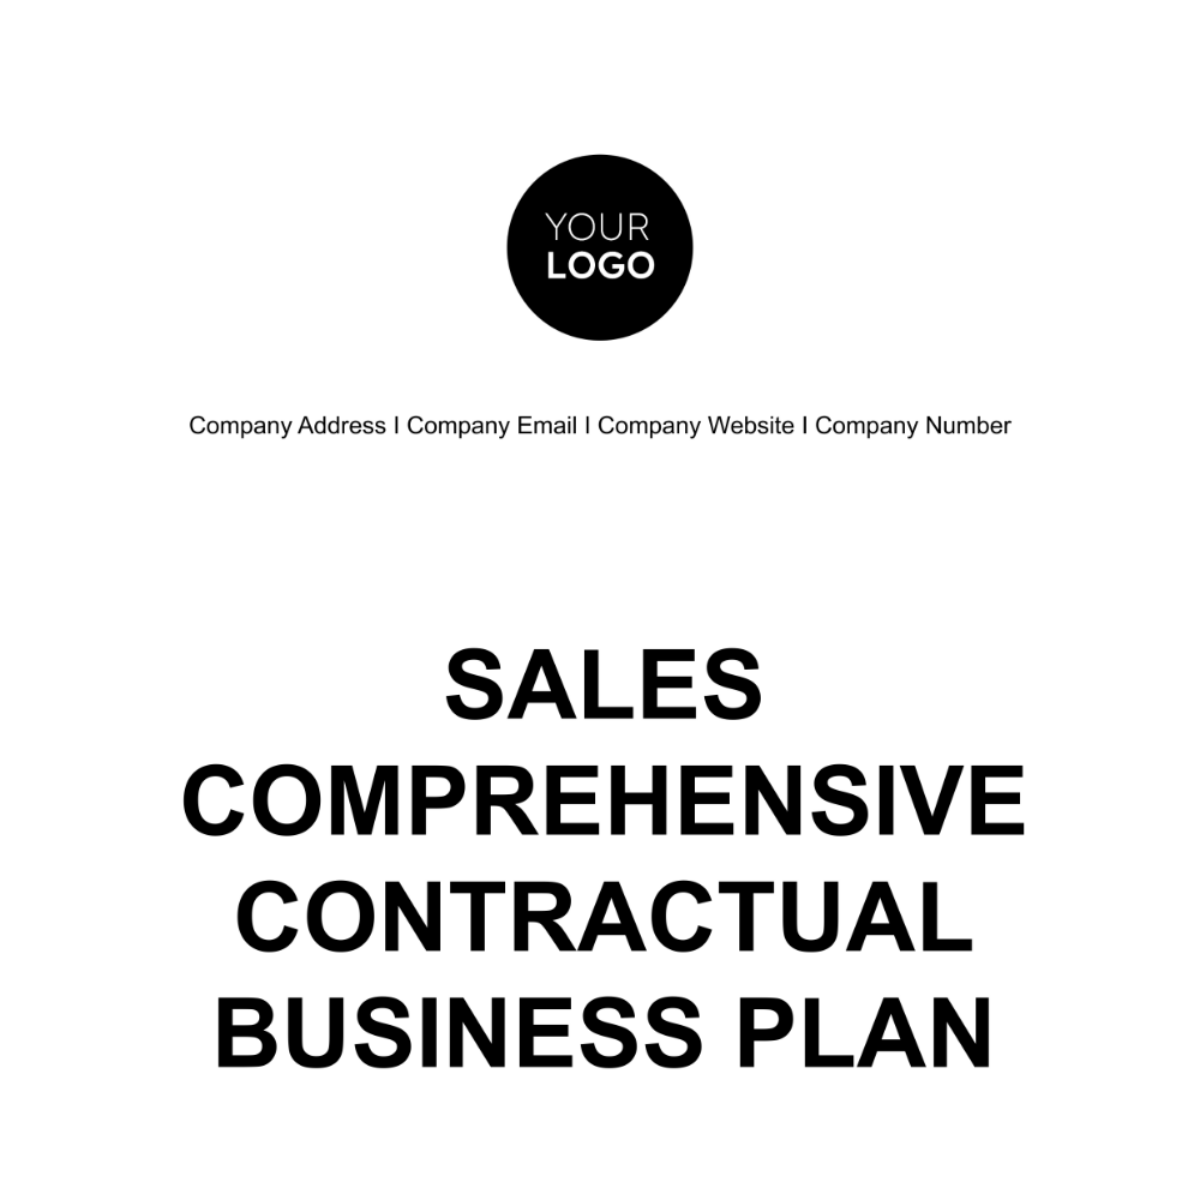 Free Sales Comprehensive Contractual Business Plan Template